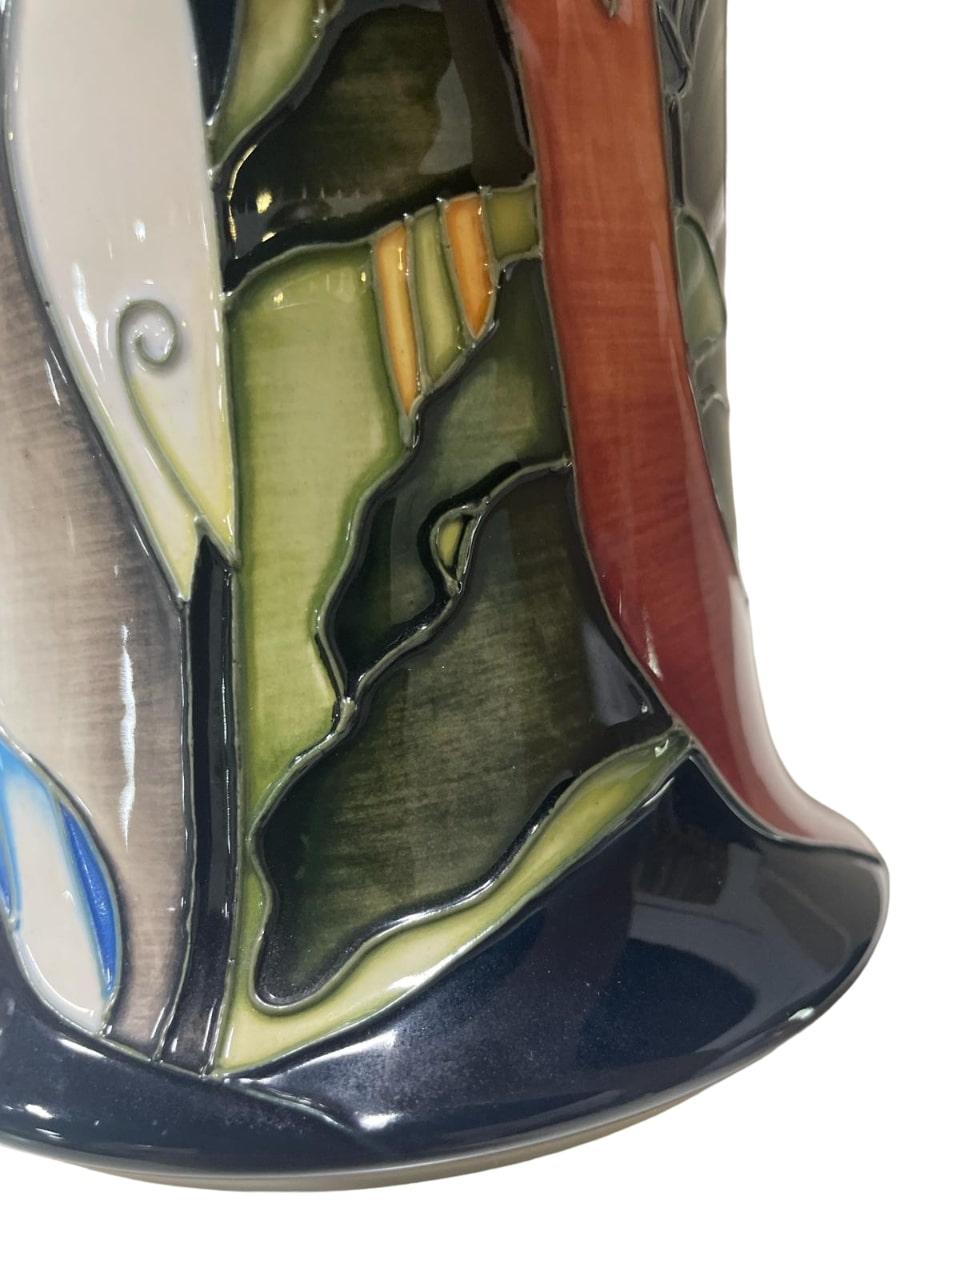 LIMITED EDITION MOORCROFT Wapiti vase by Emma Bossons dated 2012 31/35 For Sale 2